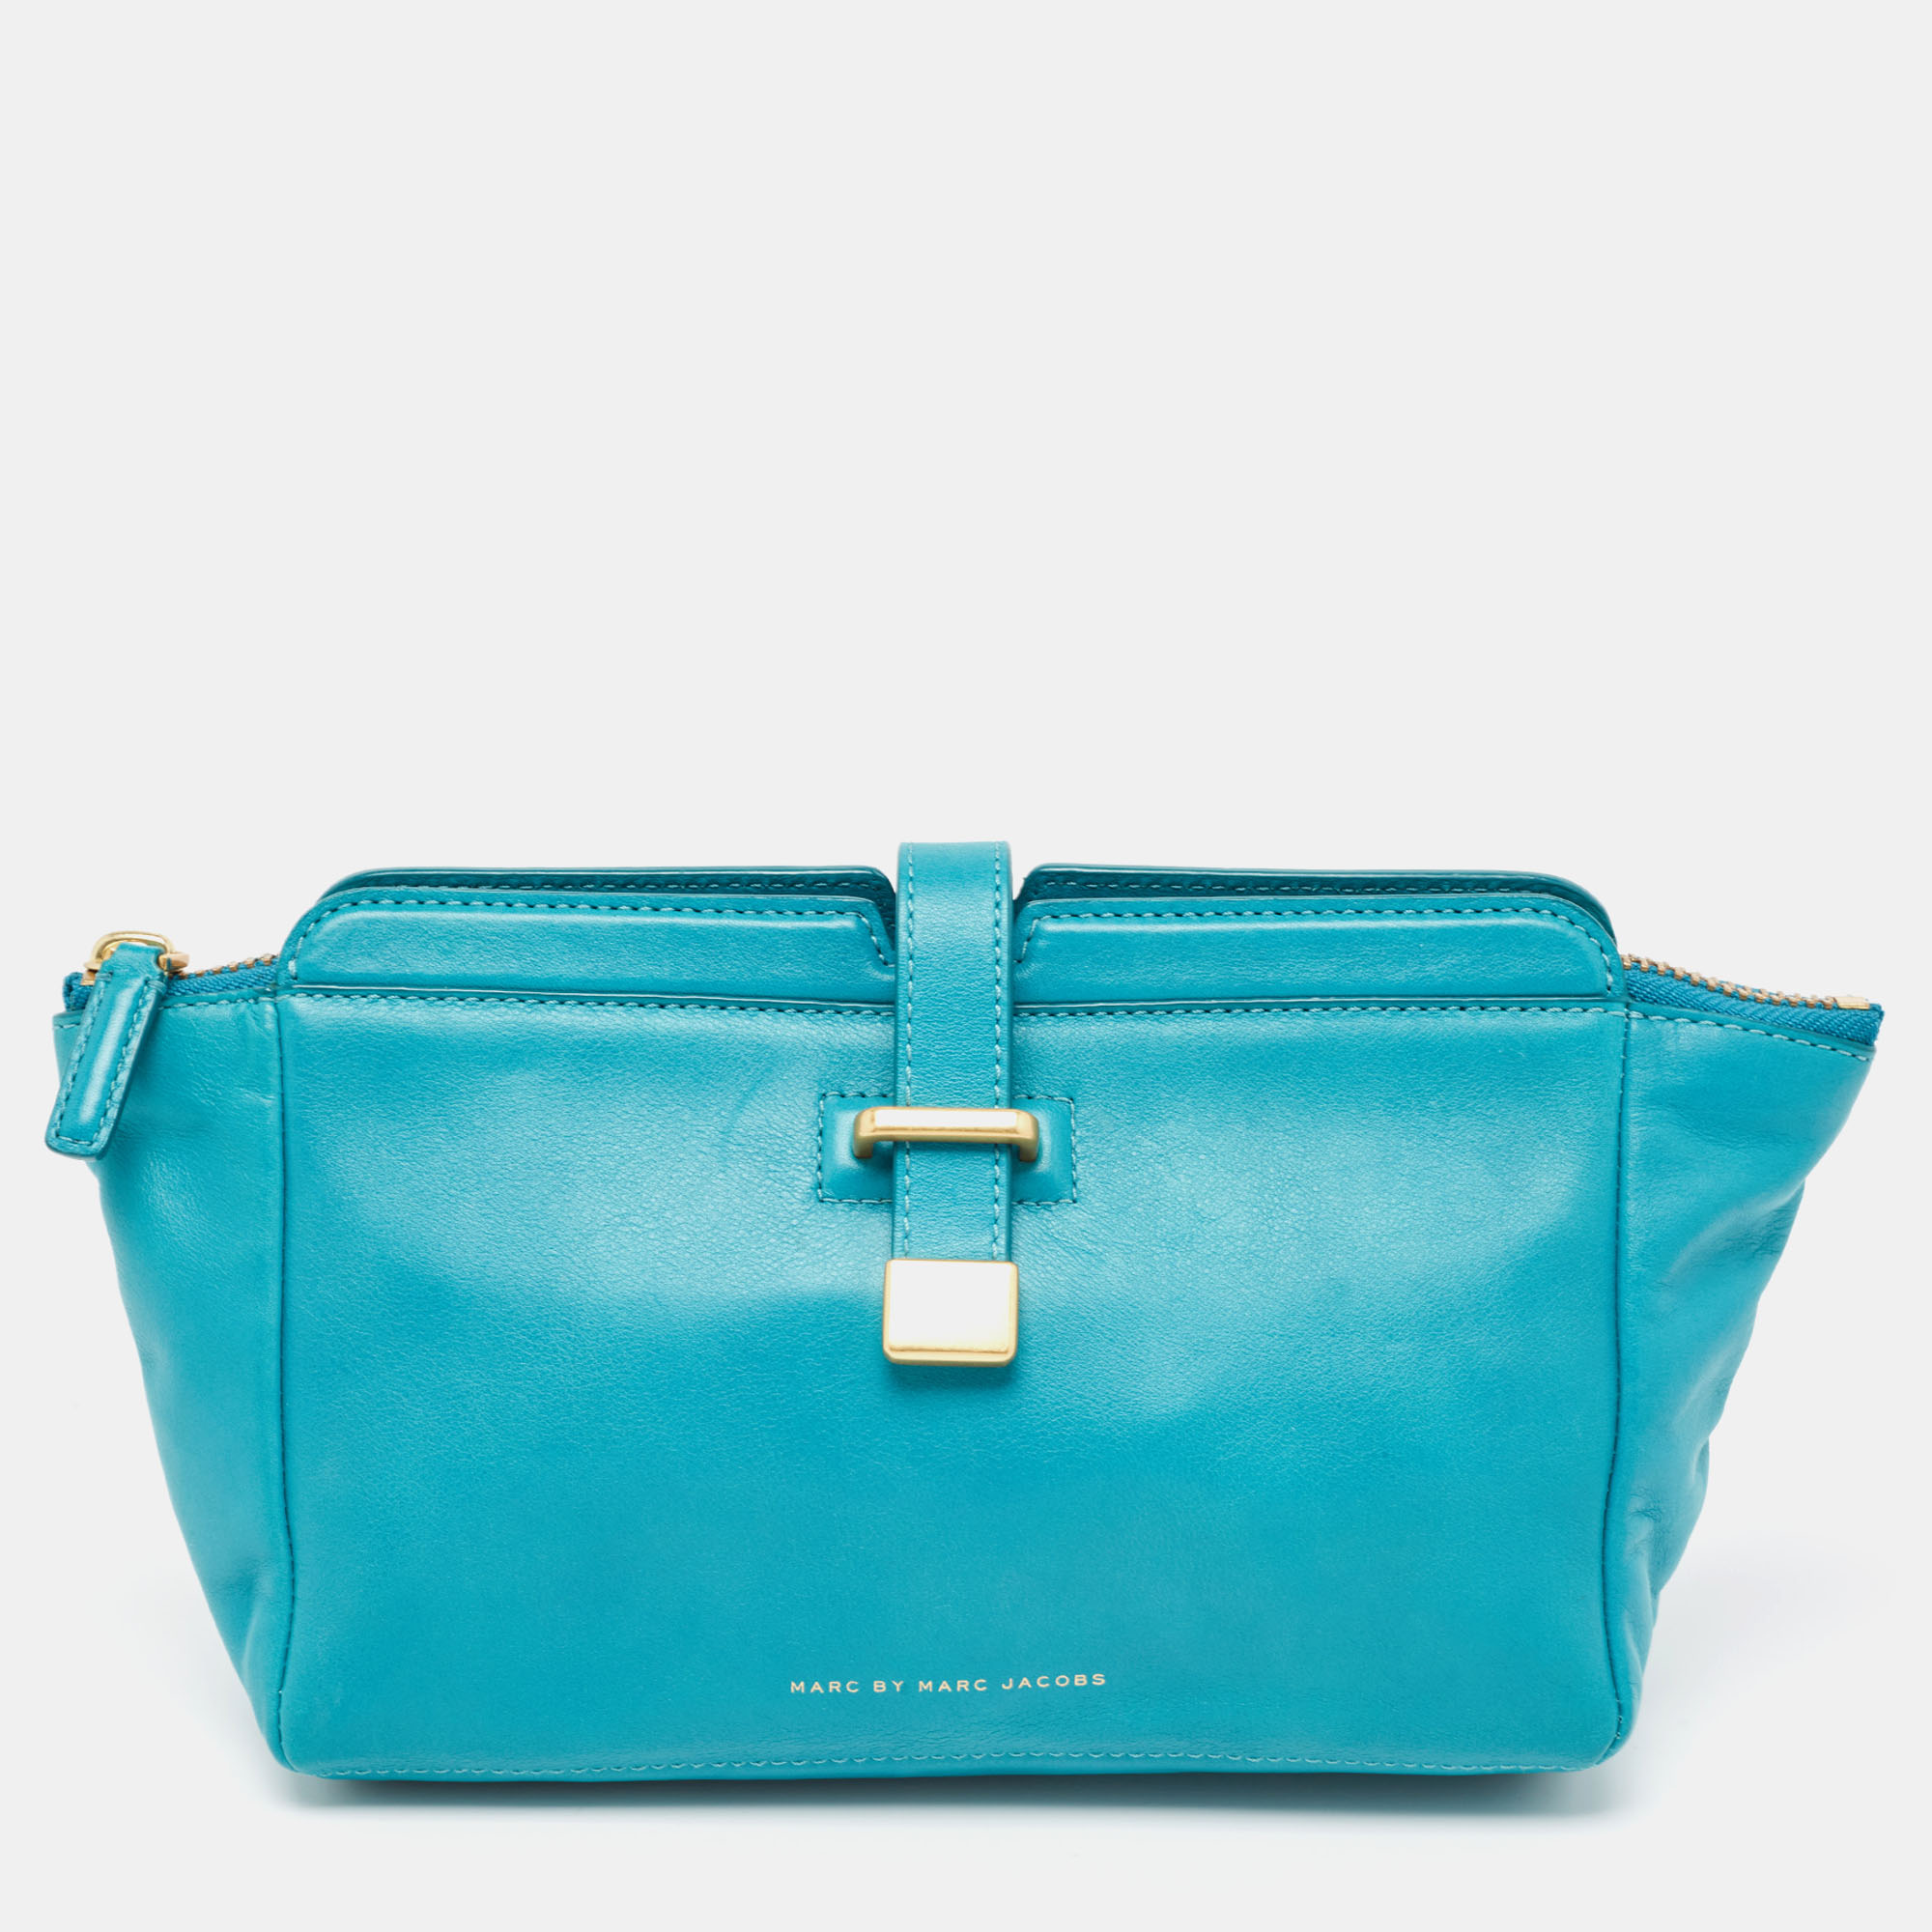 Pre-owned Marc By Marc Jacobs Green Turquoise Leather Zip Pouch